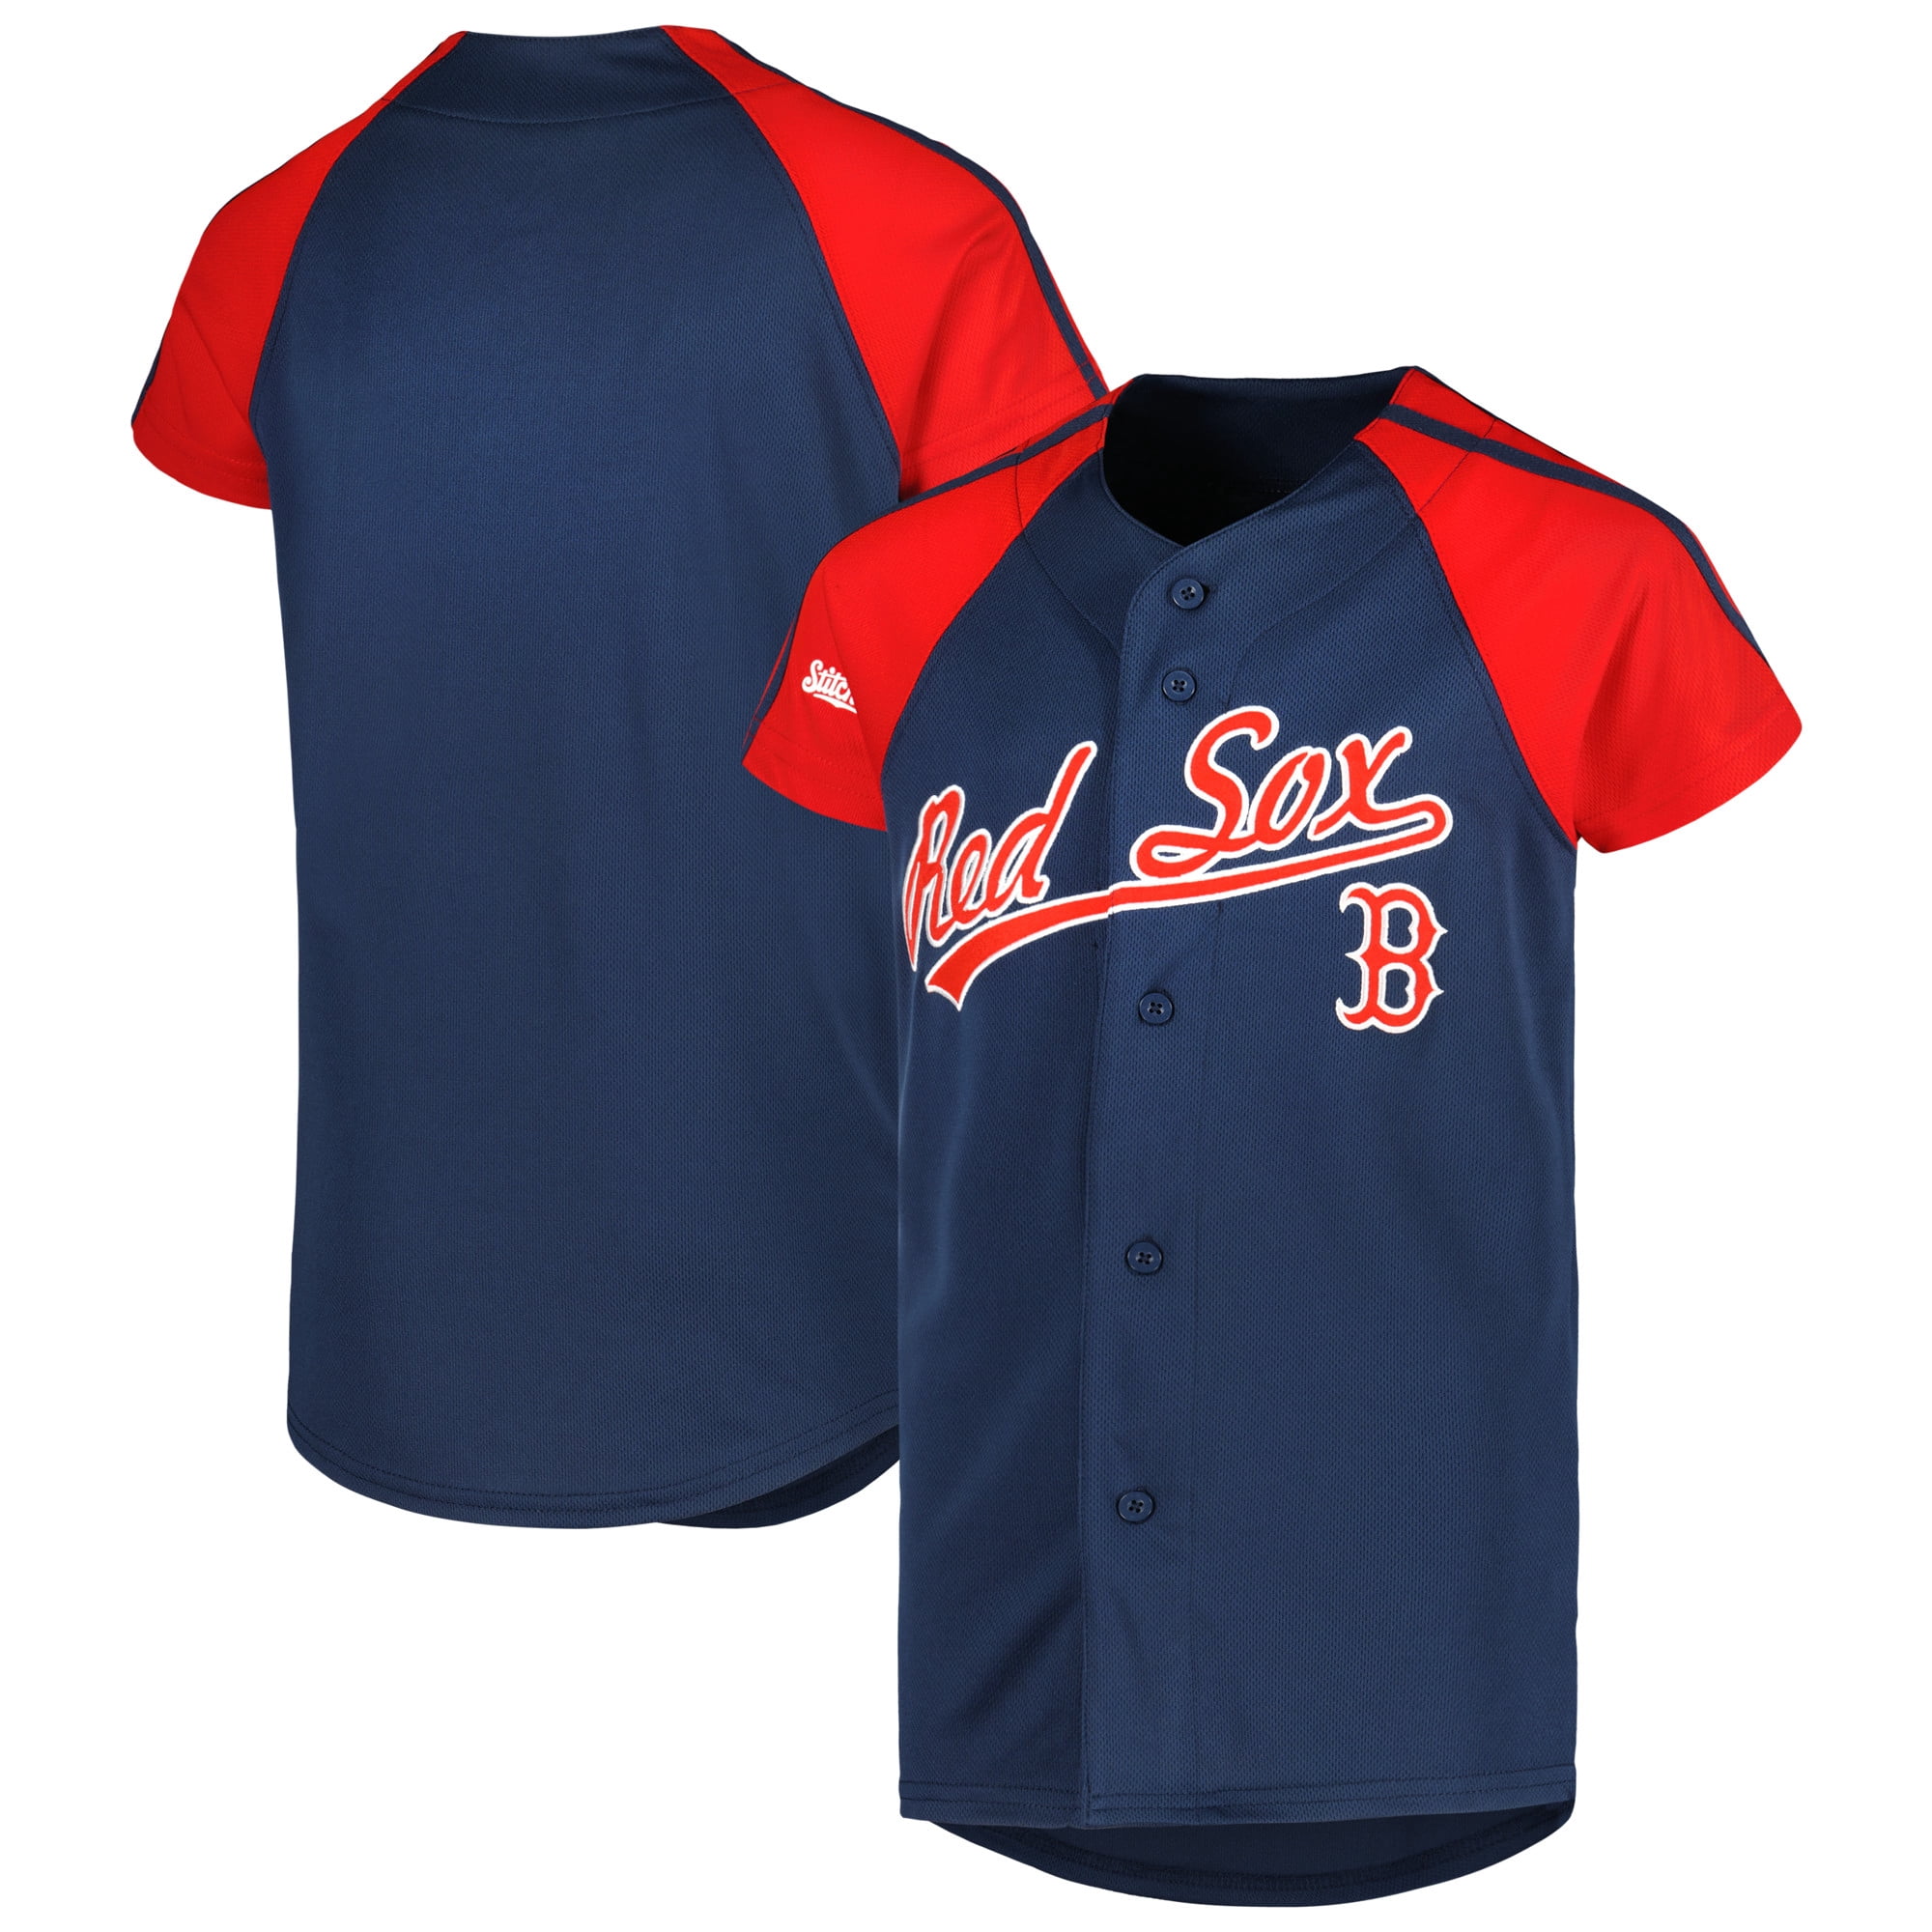 Youth Stitches Navy/Red Boston Red Sox Team Jersey 